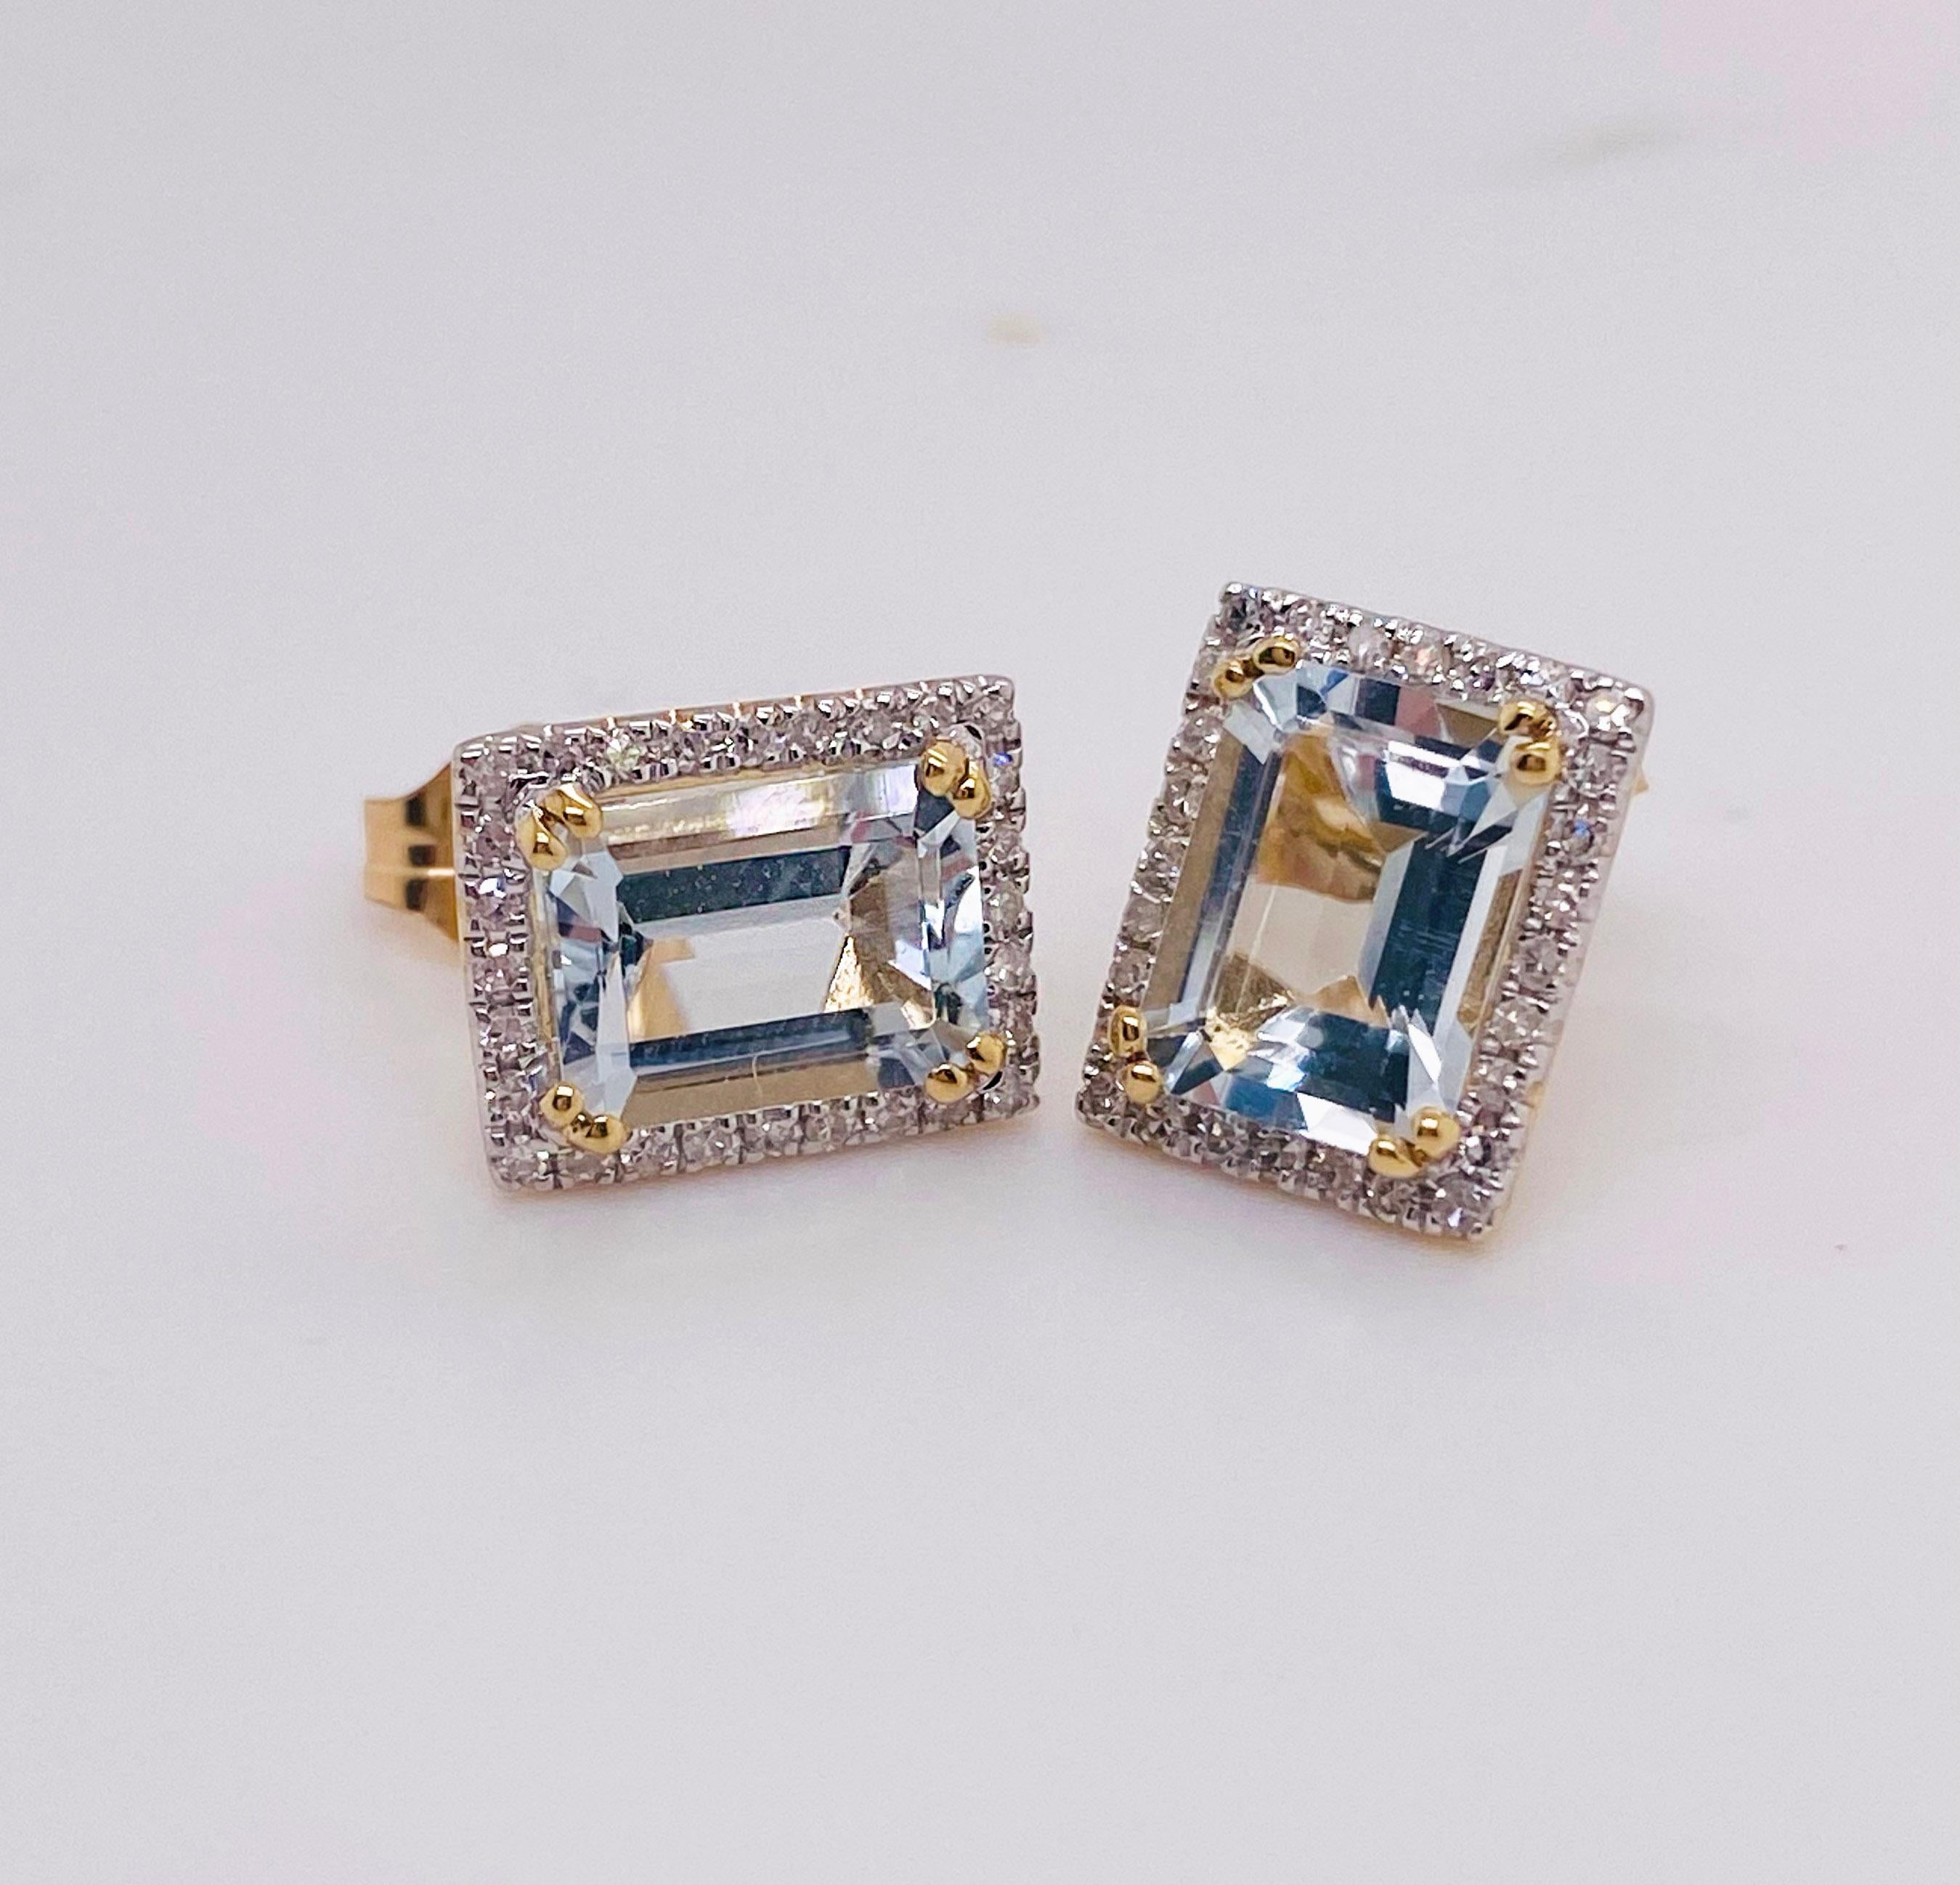 The aqua and diamond earrings are a post style and a beautiful emerald cut aquamarine
The details for these gorgeous earrings are listed below:
Metal Quality: 14 kt Yellow Gold 
Earring Type: Stud 
Diamond Number: 56
Diamond Total Weight: